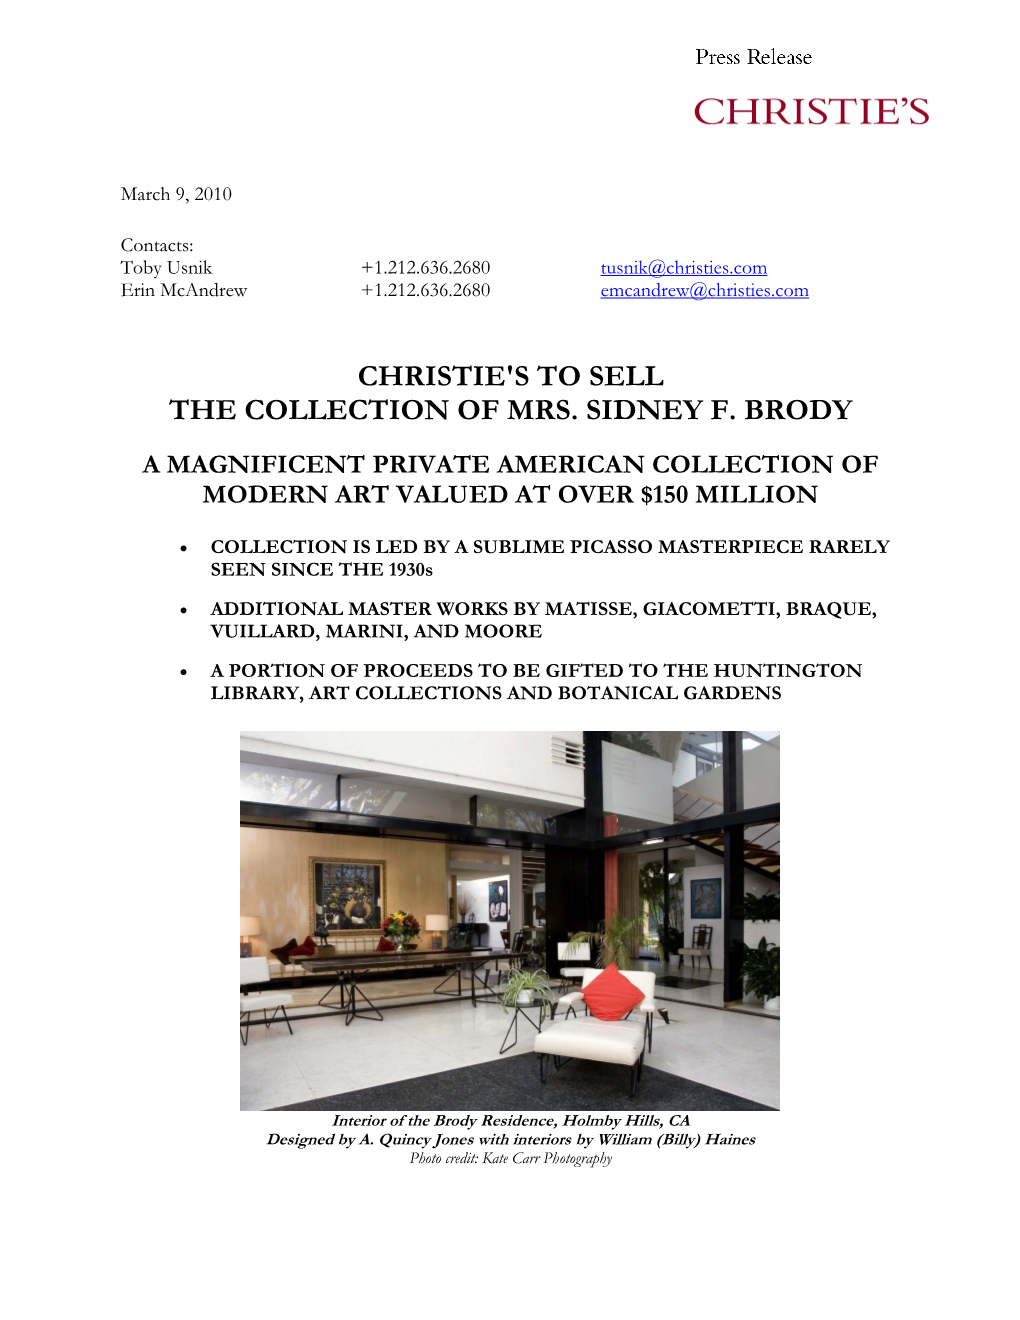 Christie's to Sell the Collection of Mrs. Sidney F